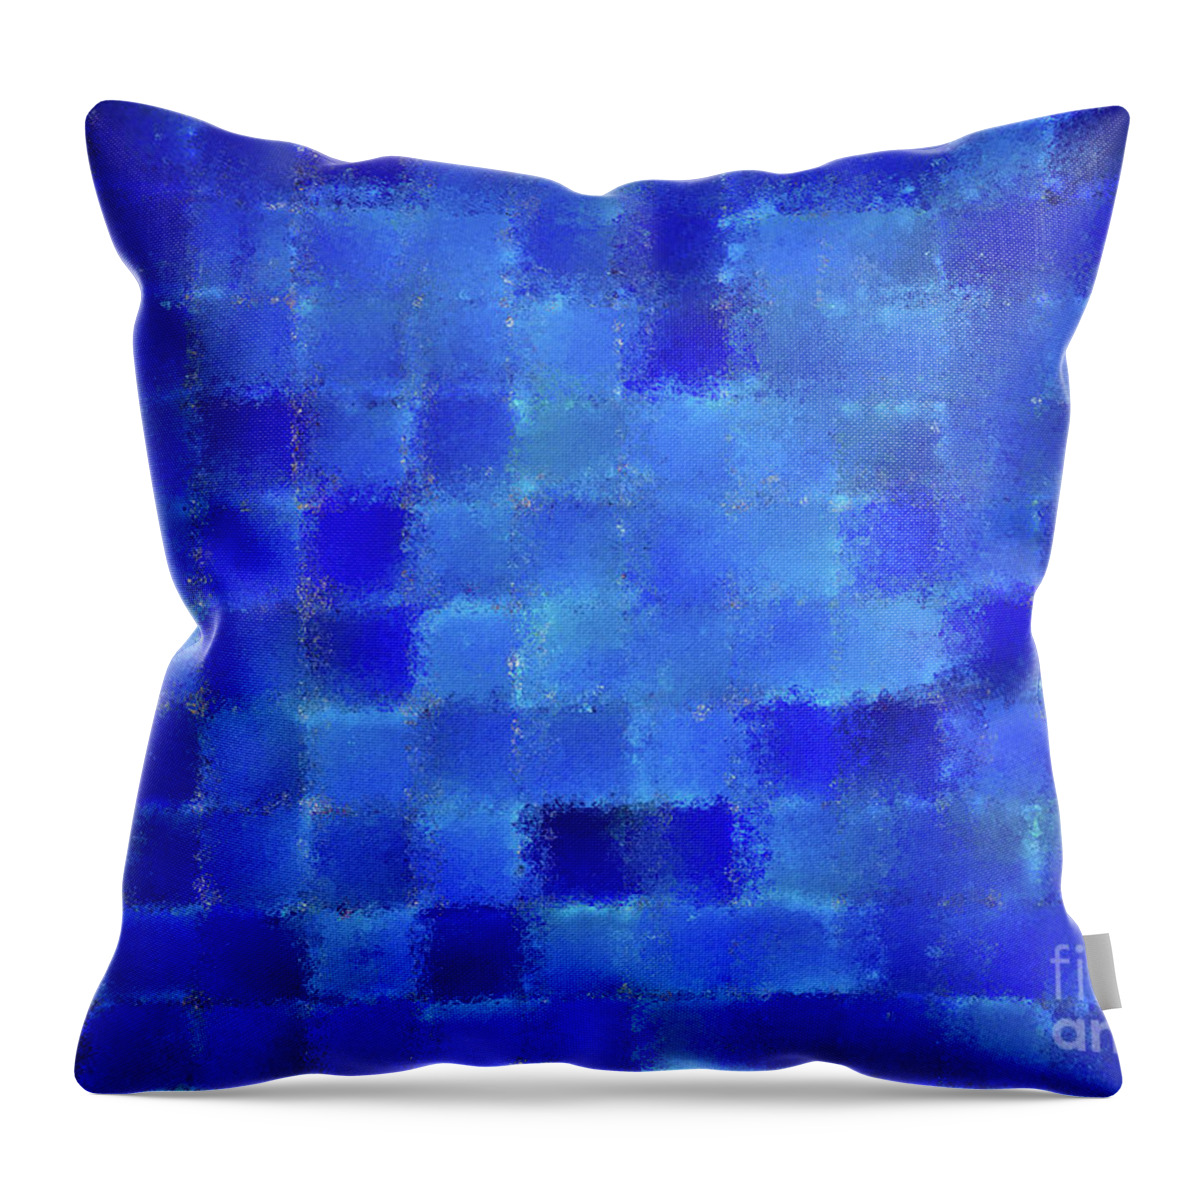 Blue Throw Pillow featuring the pyrography Turquoise Pond by Mehran Akhzari